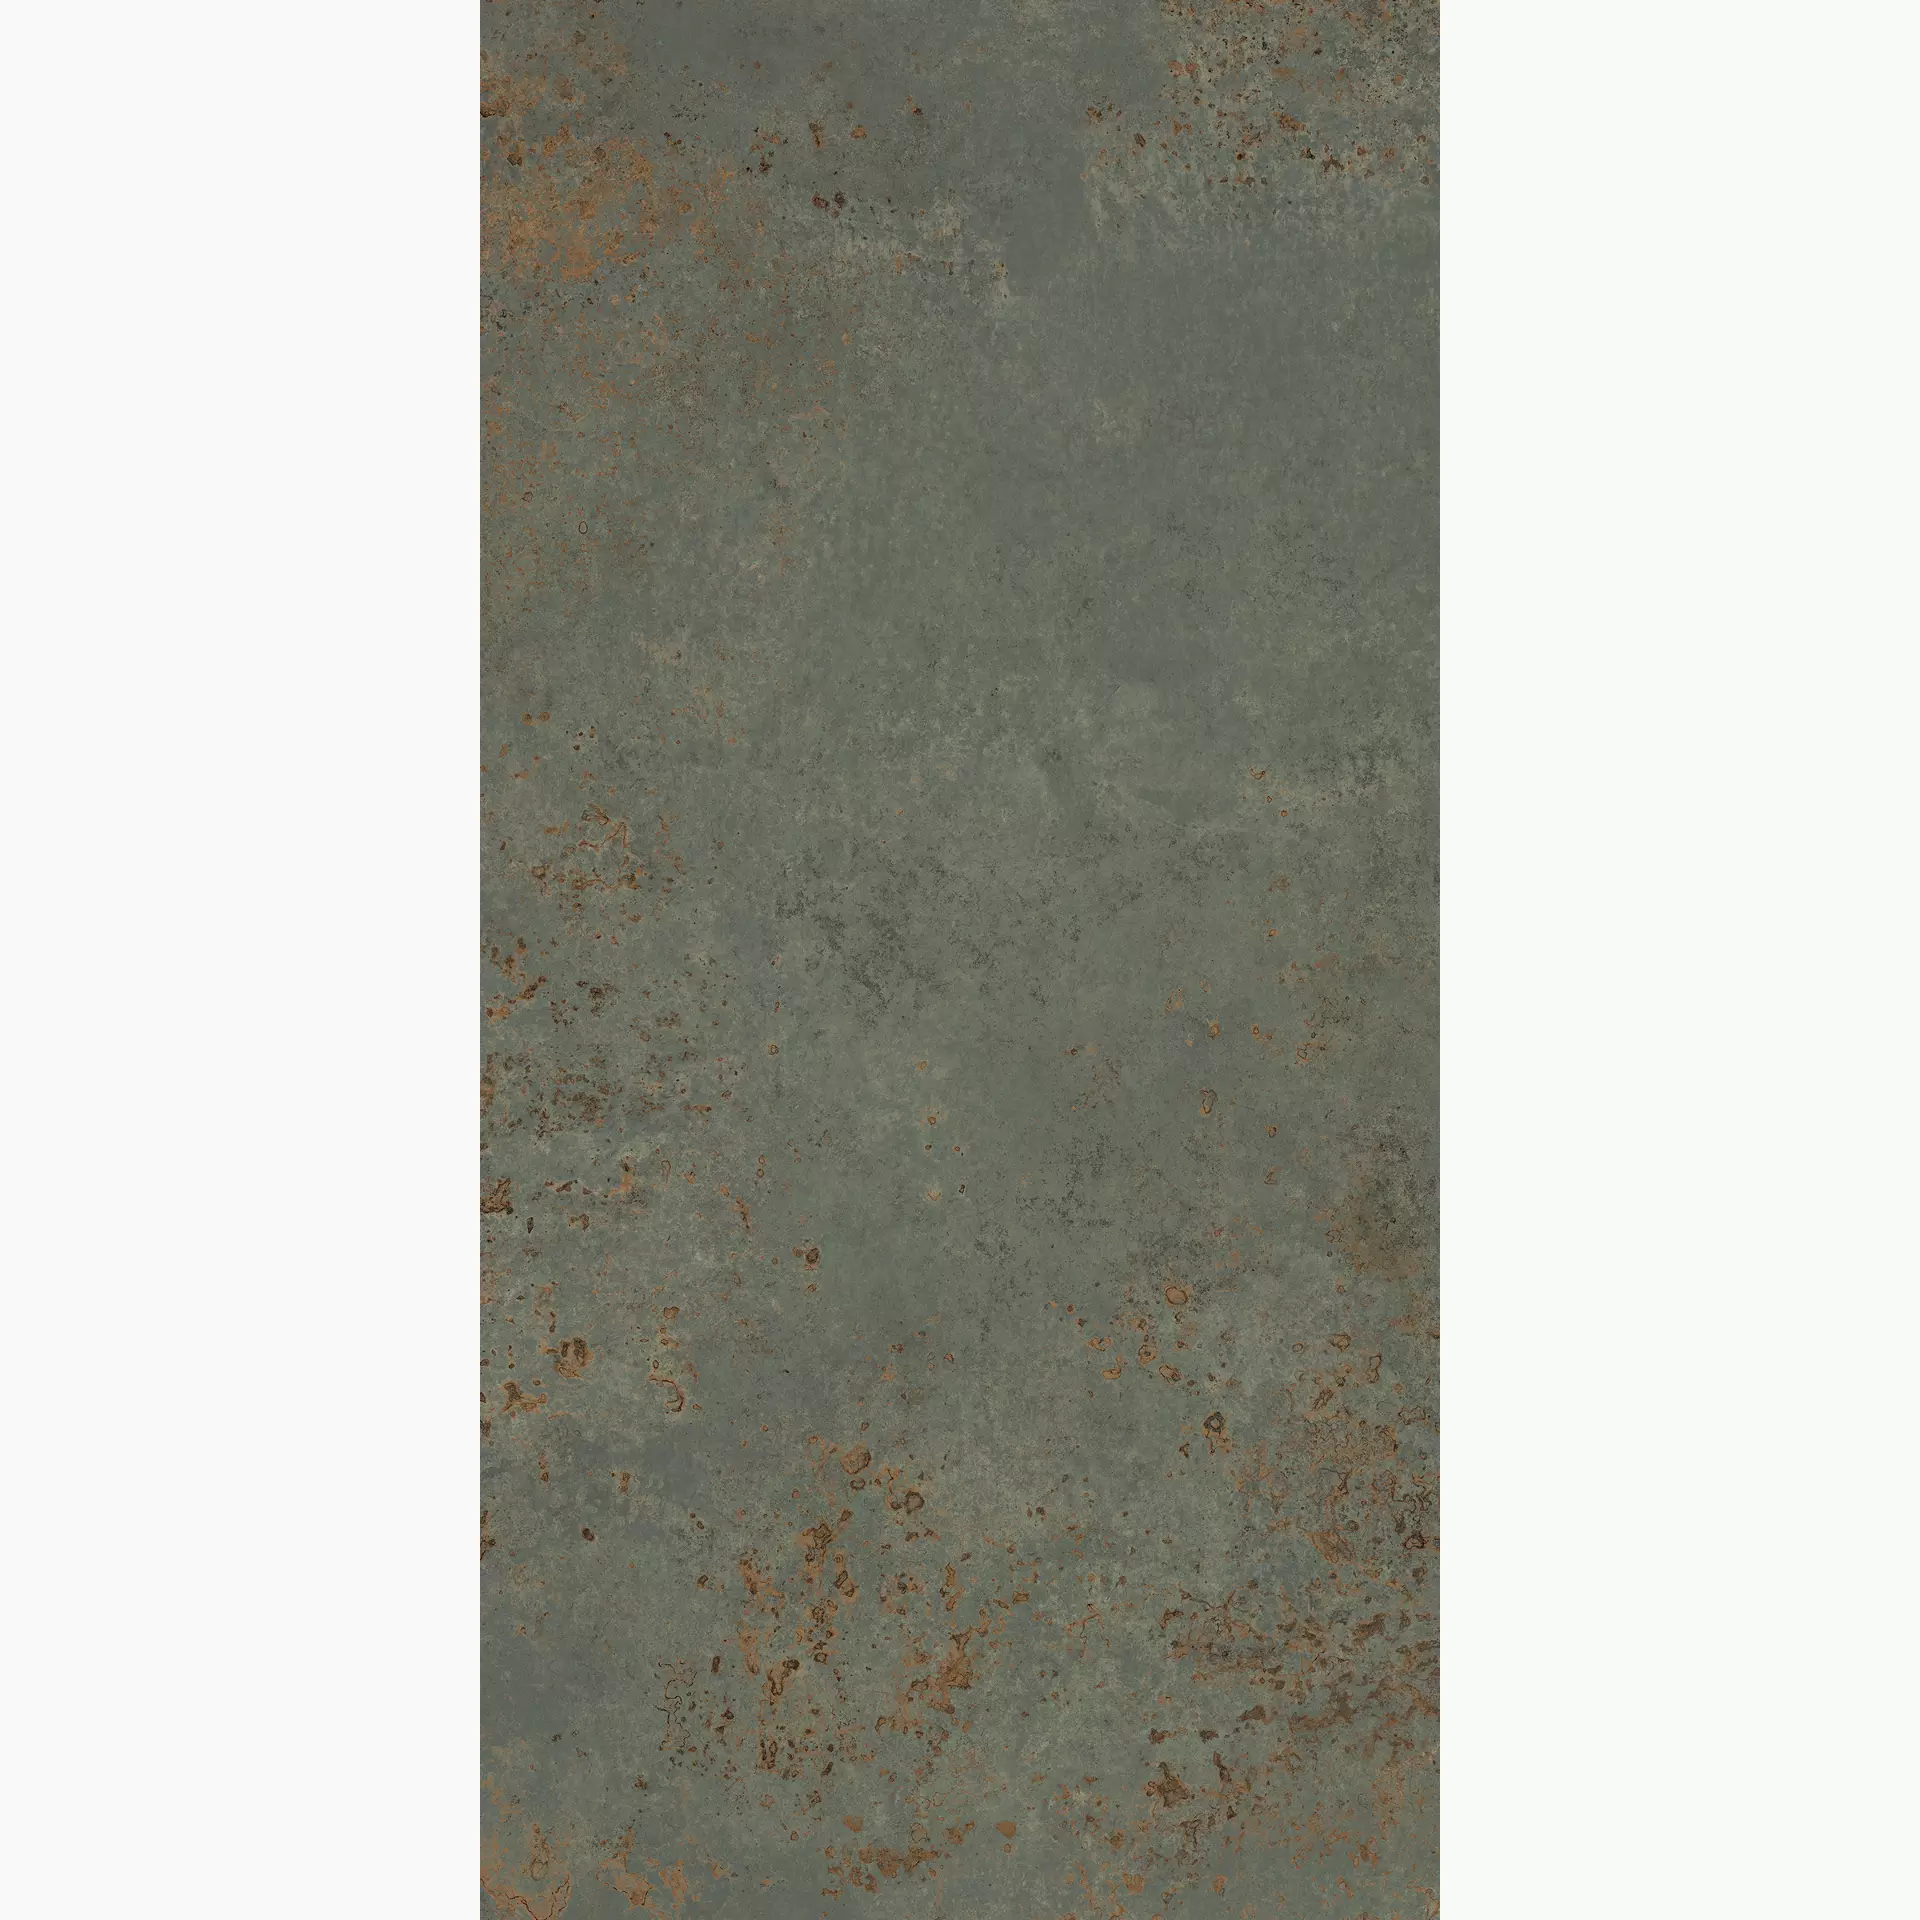 Tagina Metal Oxide Naturale 124093 60x120cm rectified 10mm